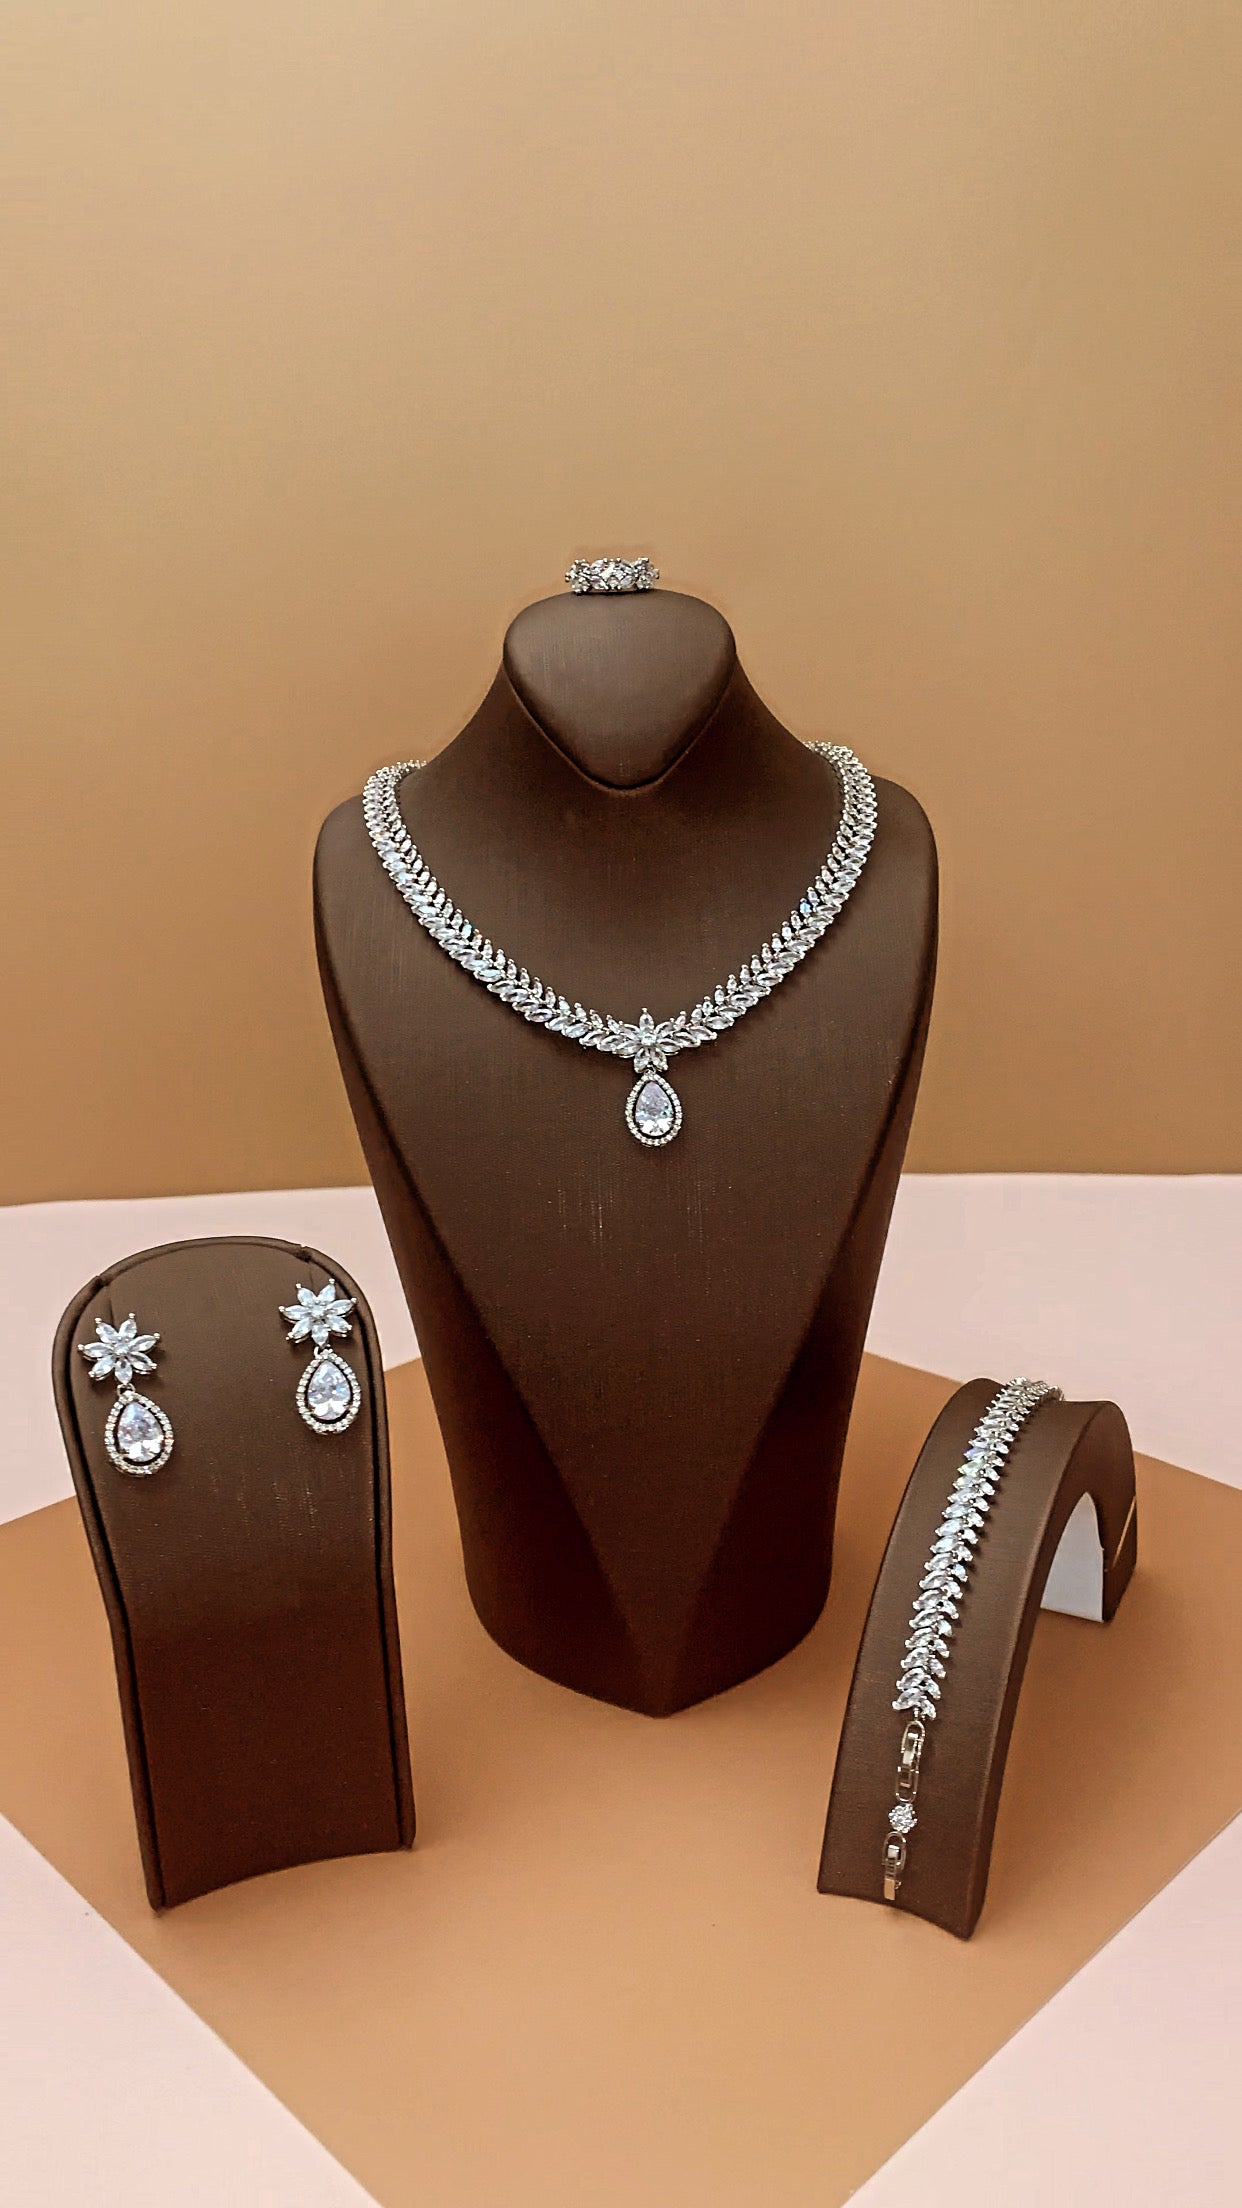 HARMONY Jewelry Set with Necklace, Bracelet, Drop Earrings, and Ring - SAMPLE SALE